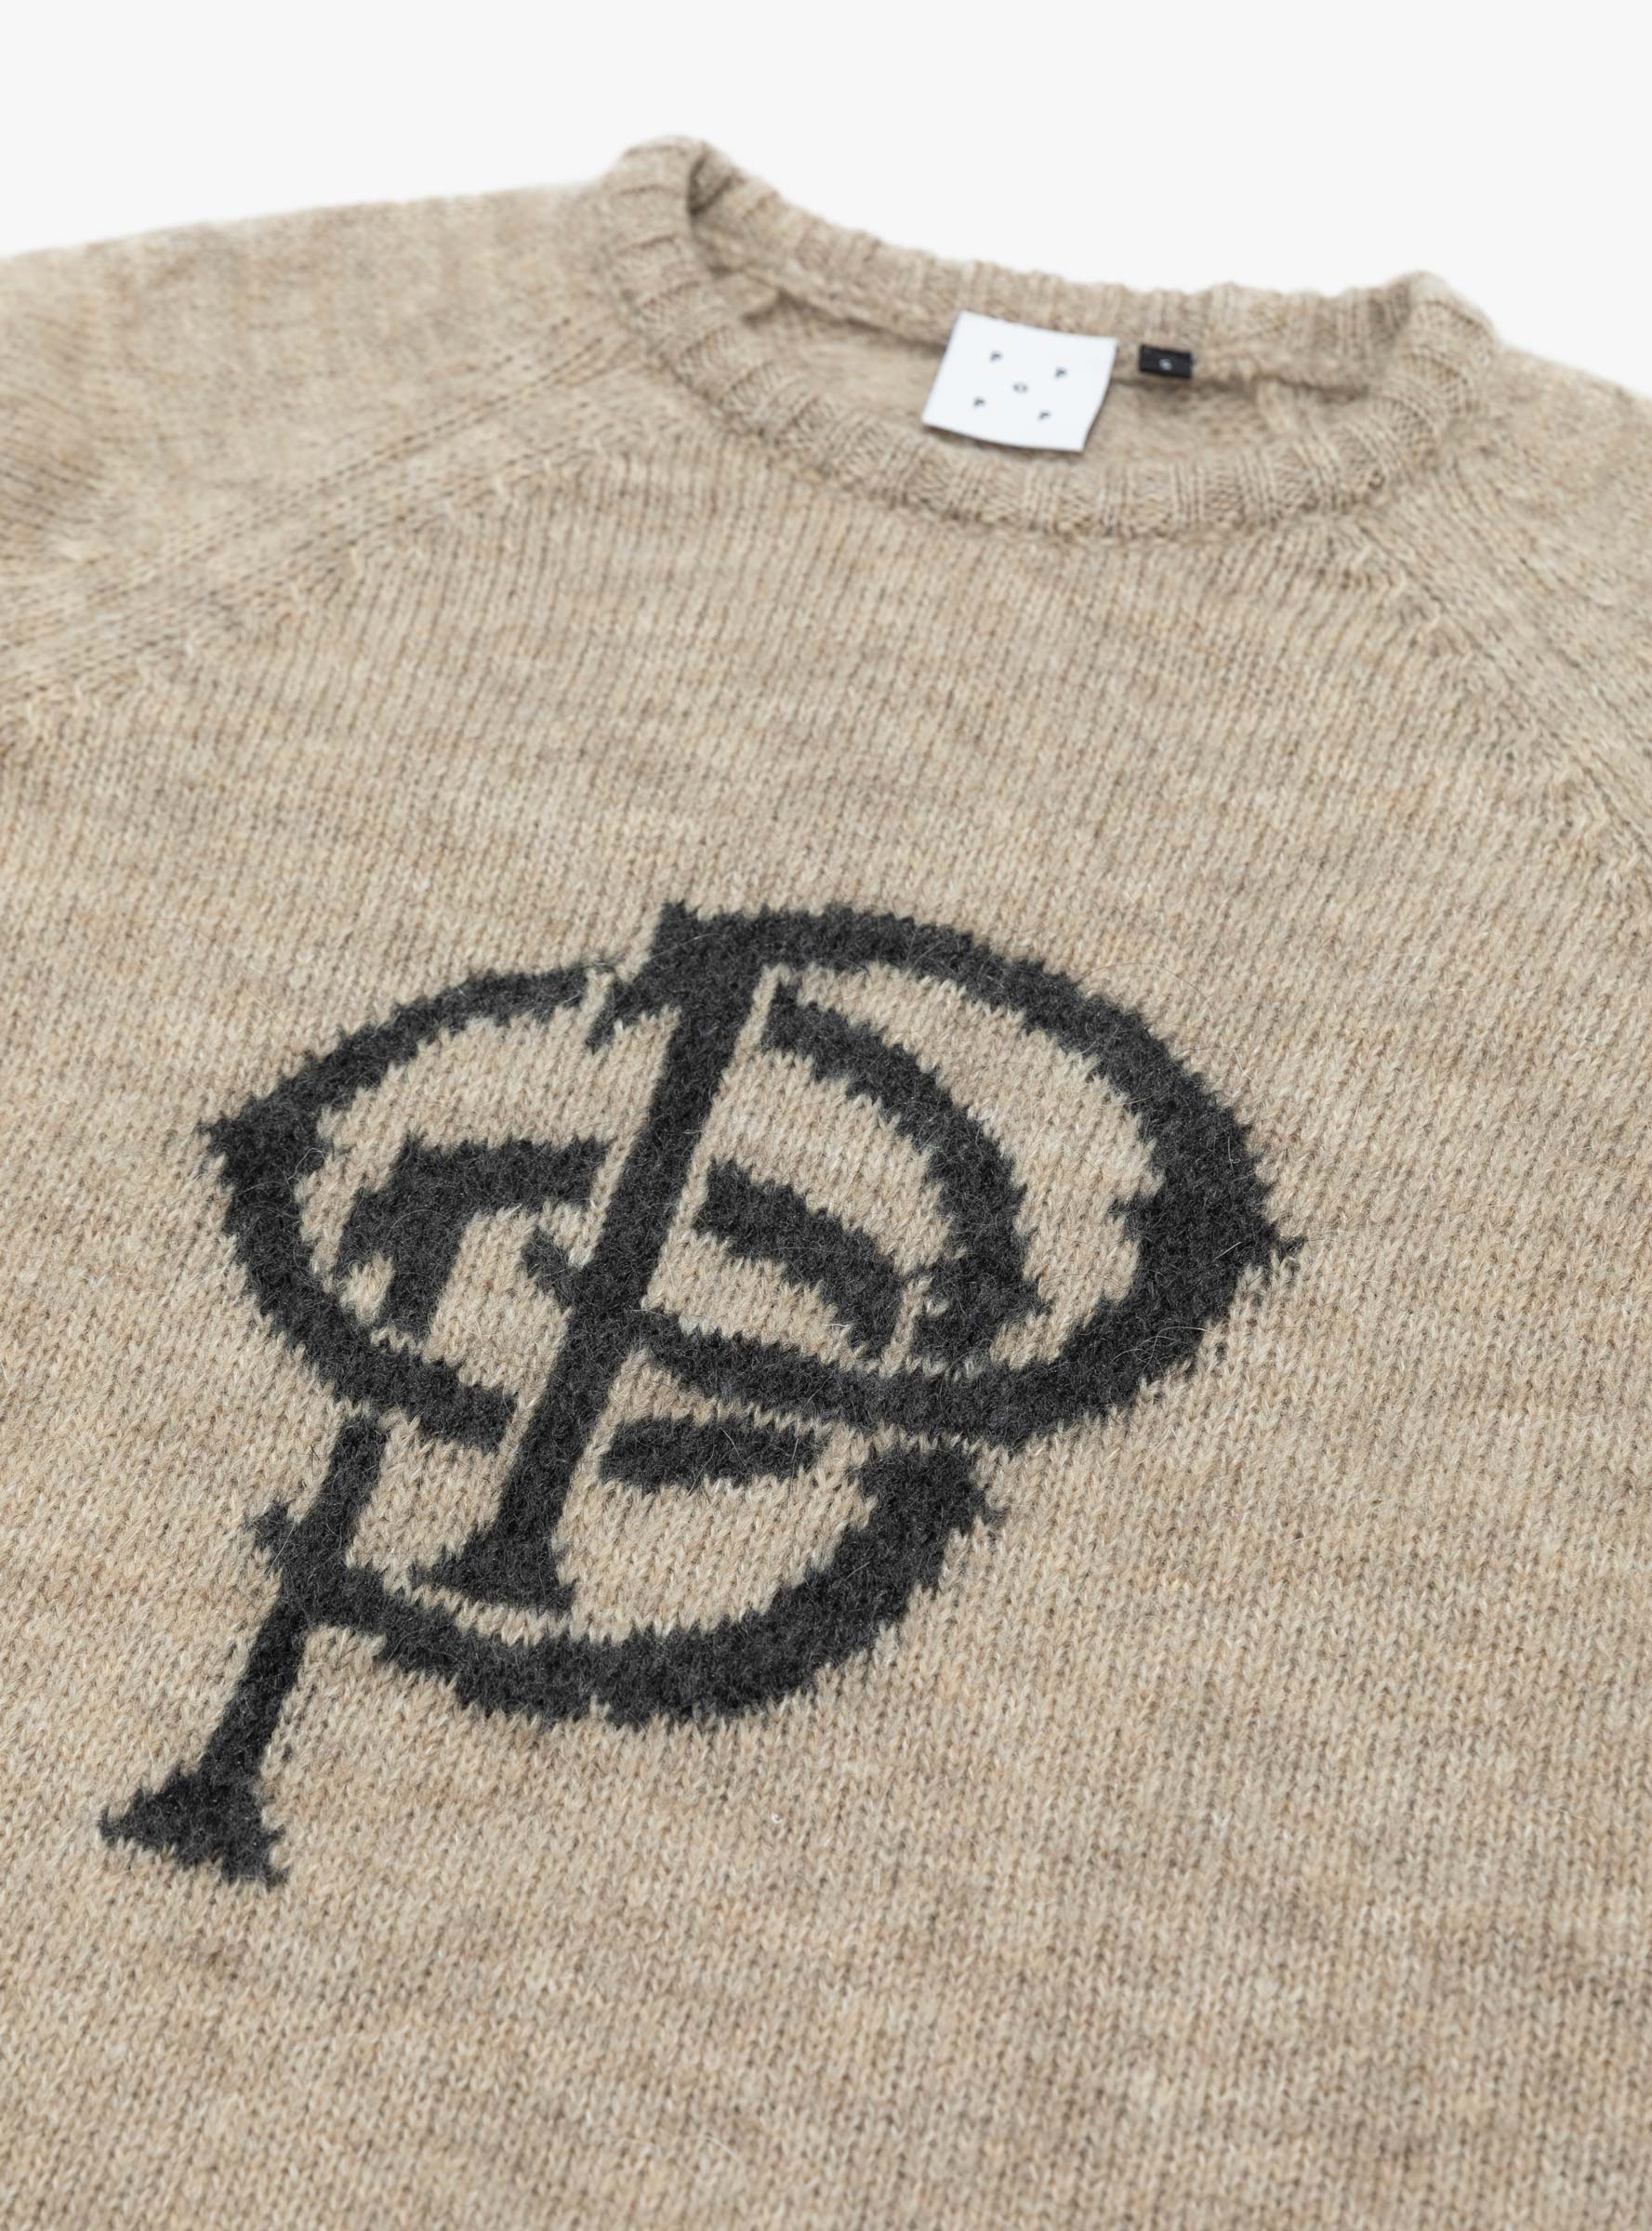 Pop Trading Company Pop Trading Company Initials Knitted Crewneck Sesame - Size: Large